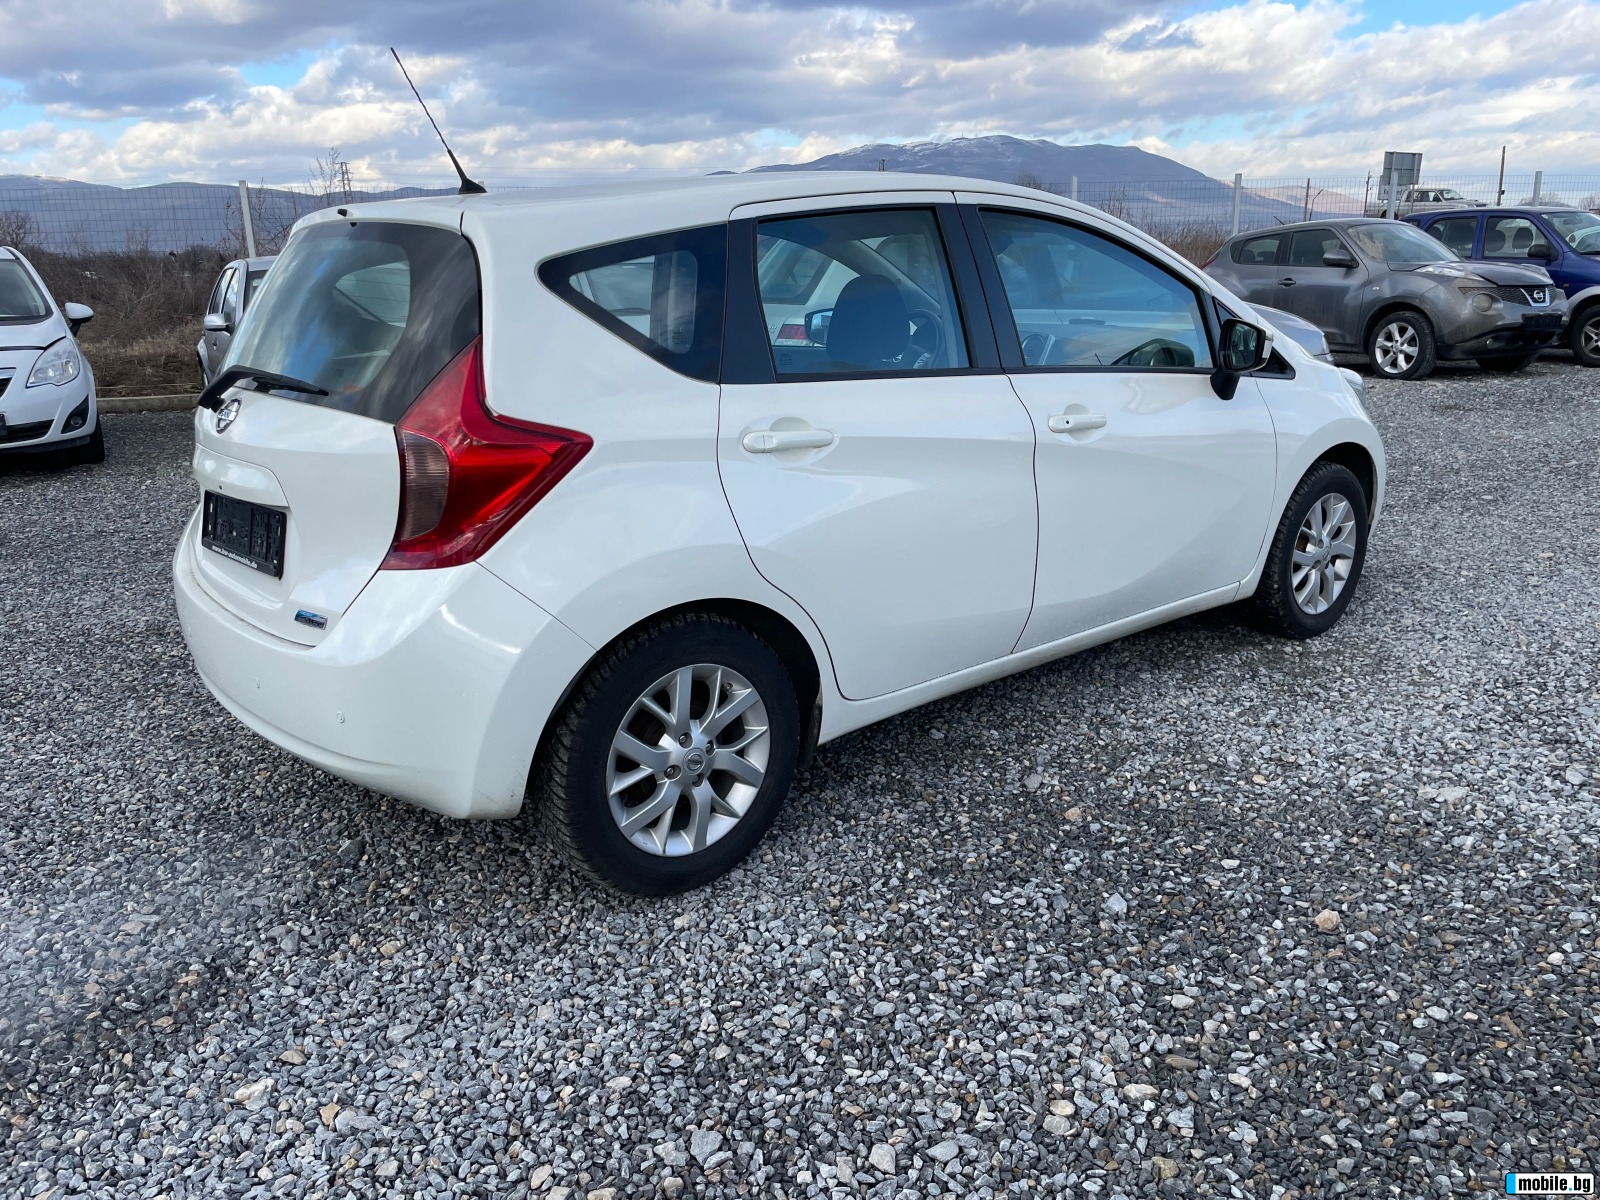 Nissan Note 1.5 DCI EVRO 5 | Mobile.bg   8